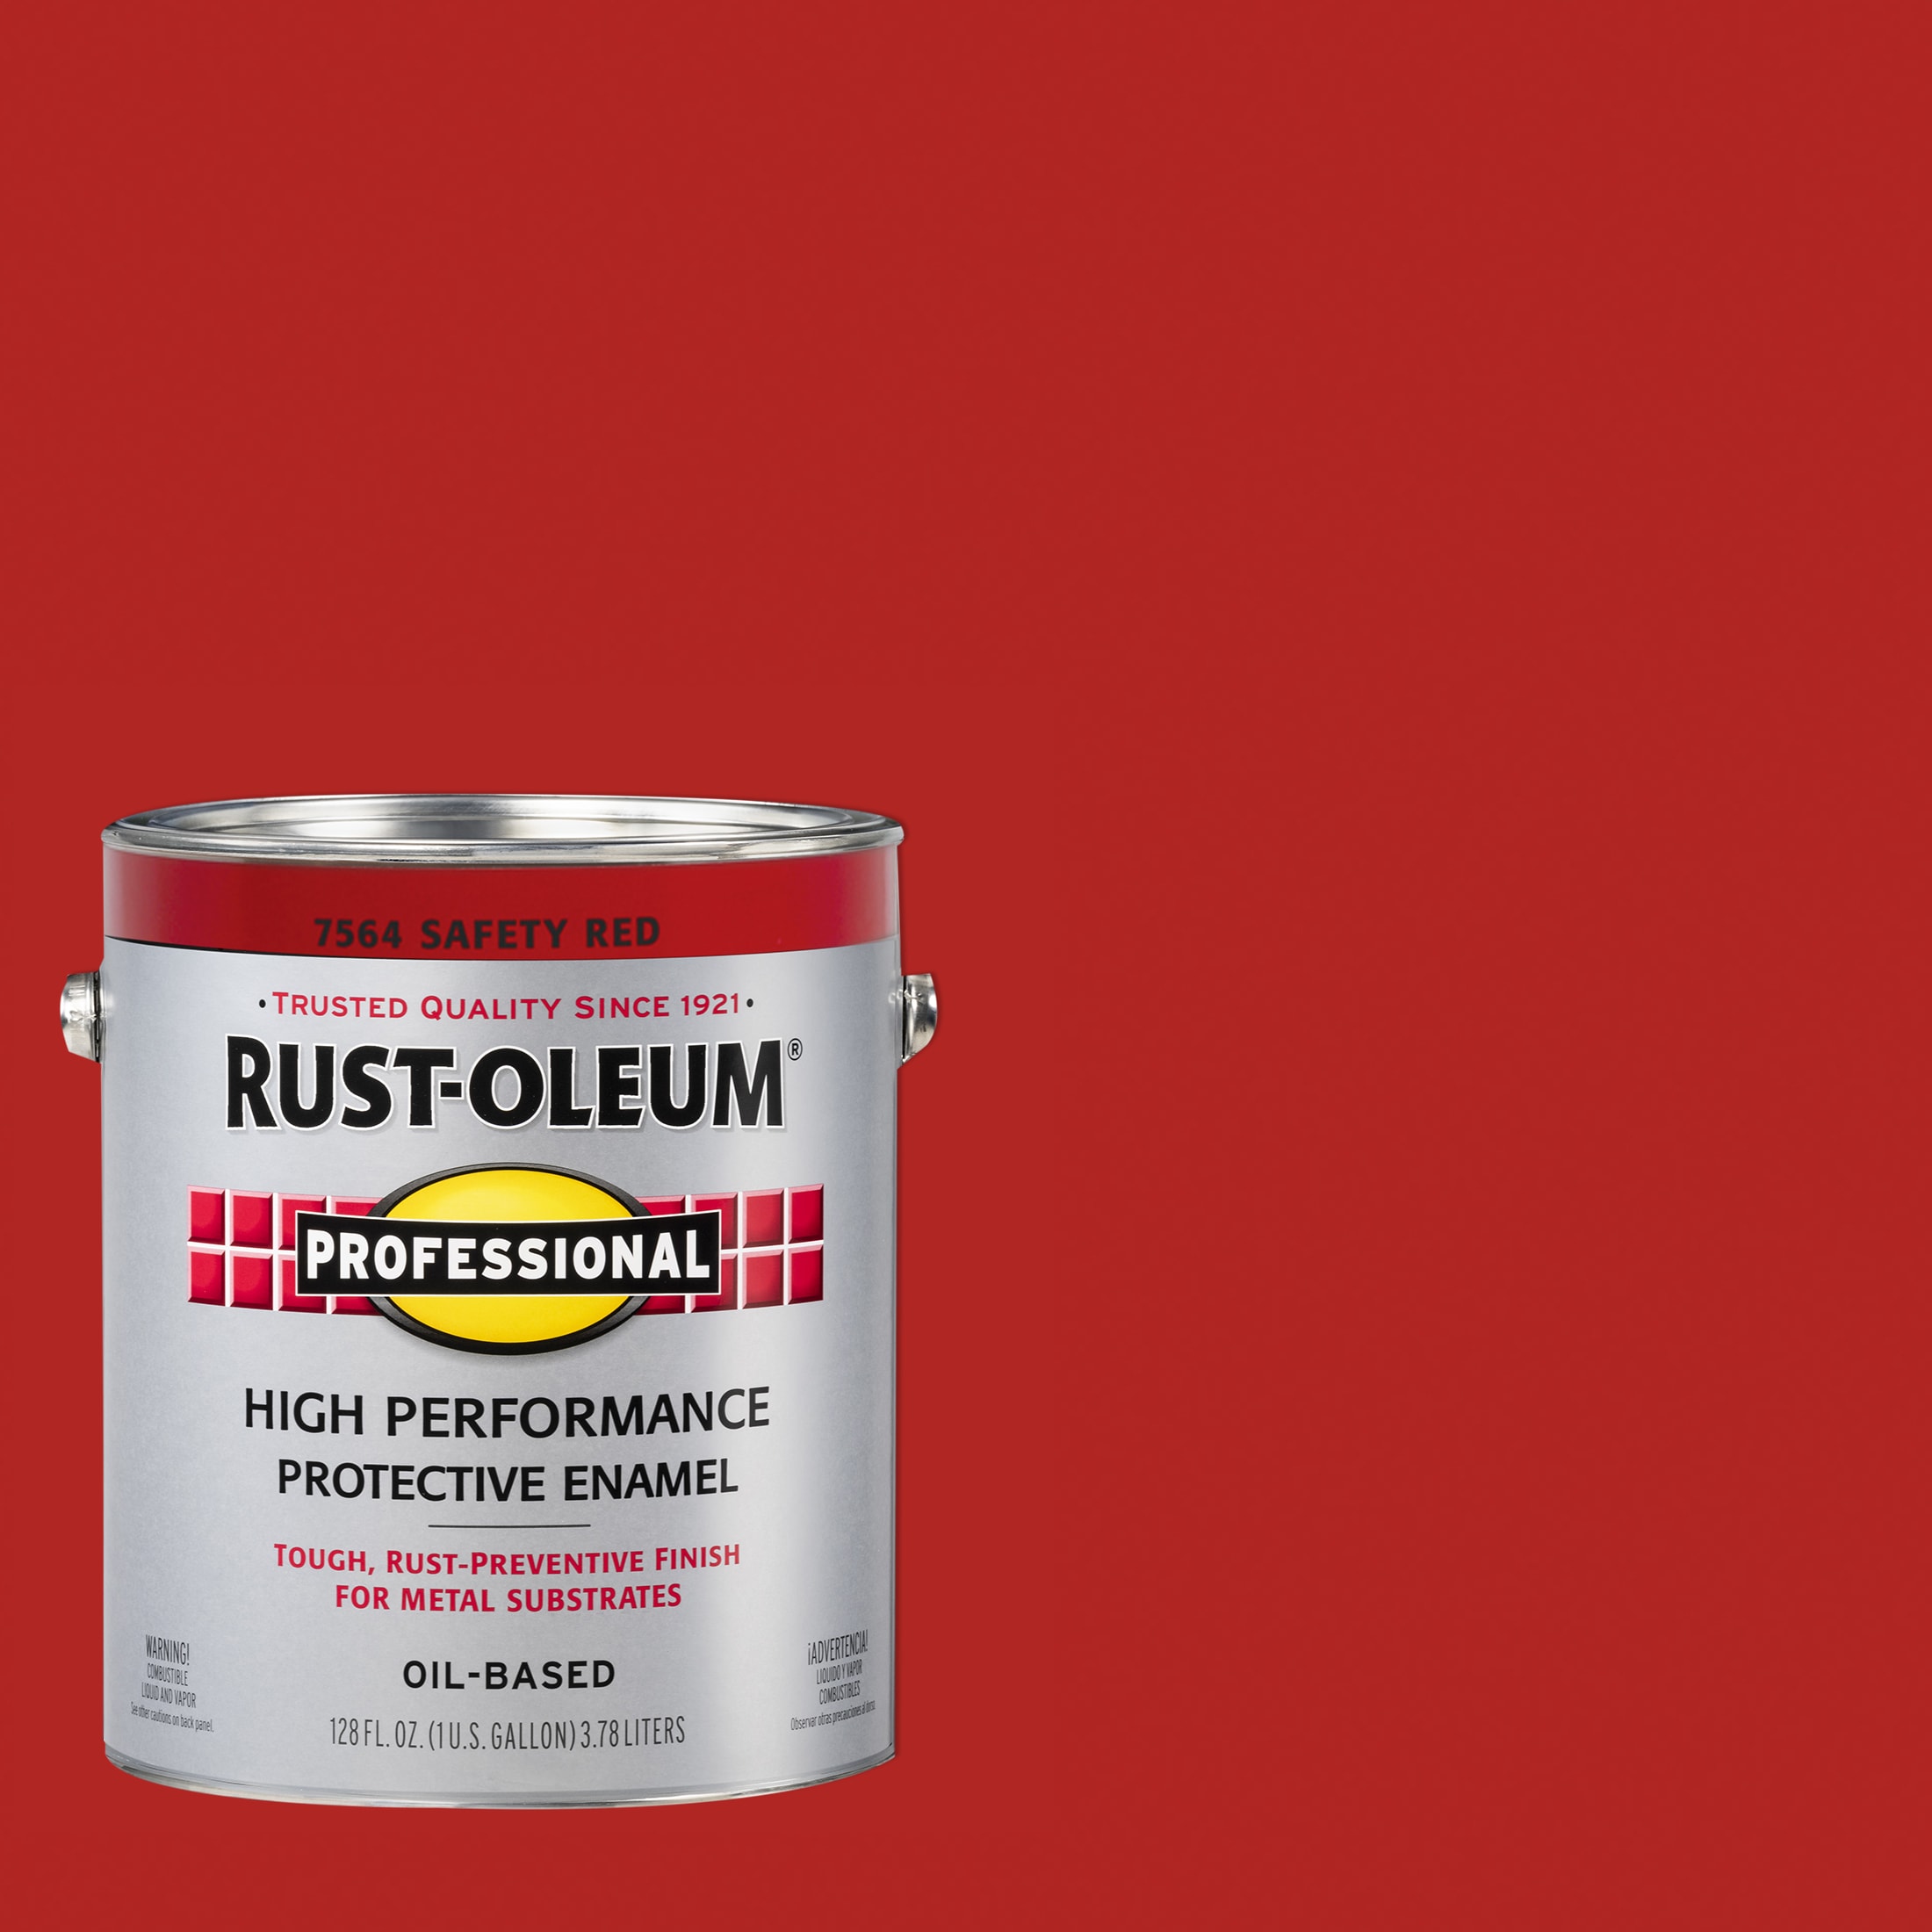 Rust-Oleum Professional Gloss Safety Red Spray Paint 15 oz.